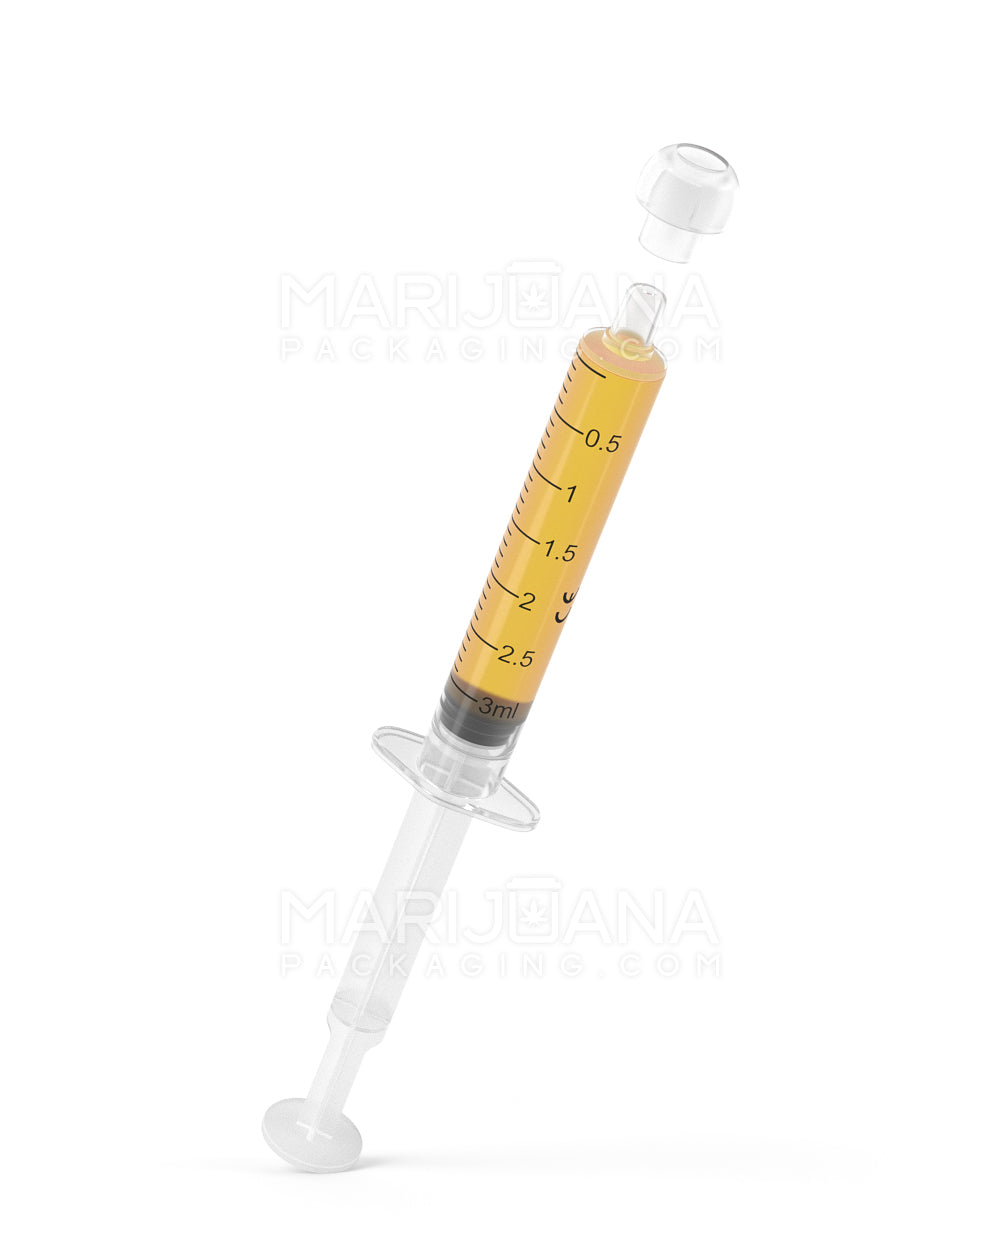 Plastic Oral Concentrate Syringes | 3mL - 0.5mL Increments - 100 Count - 6